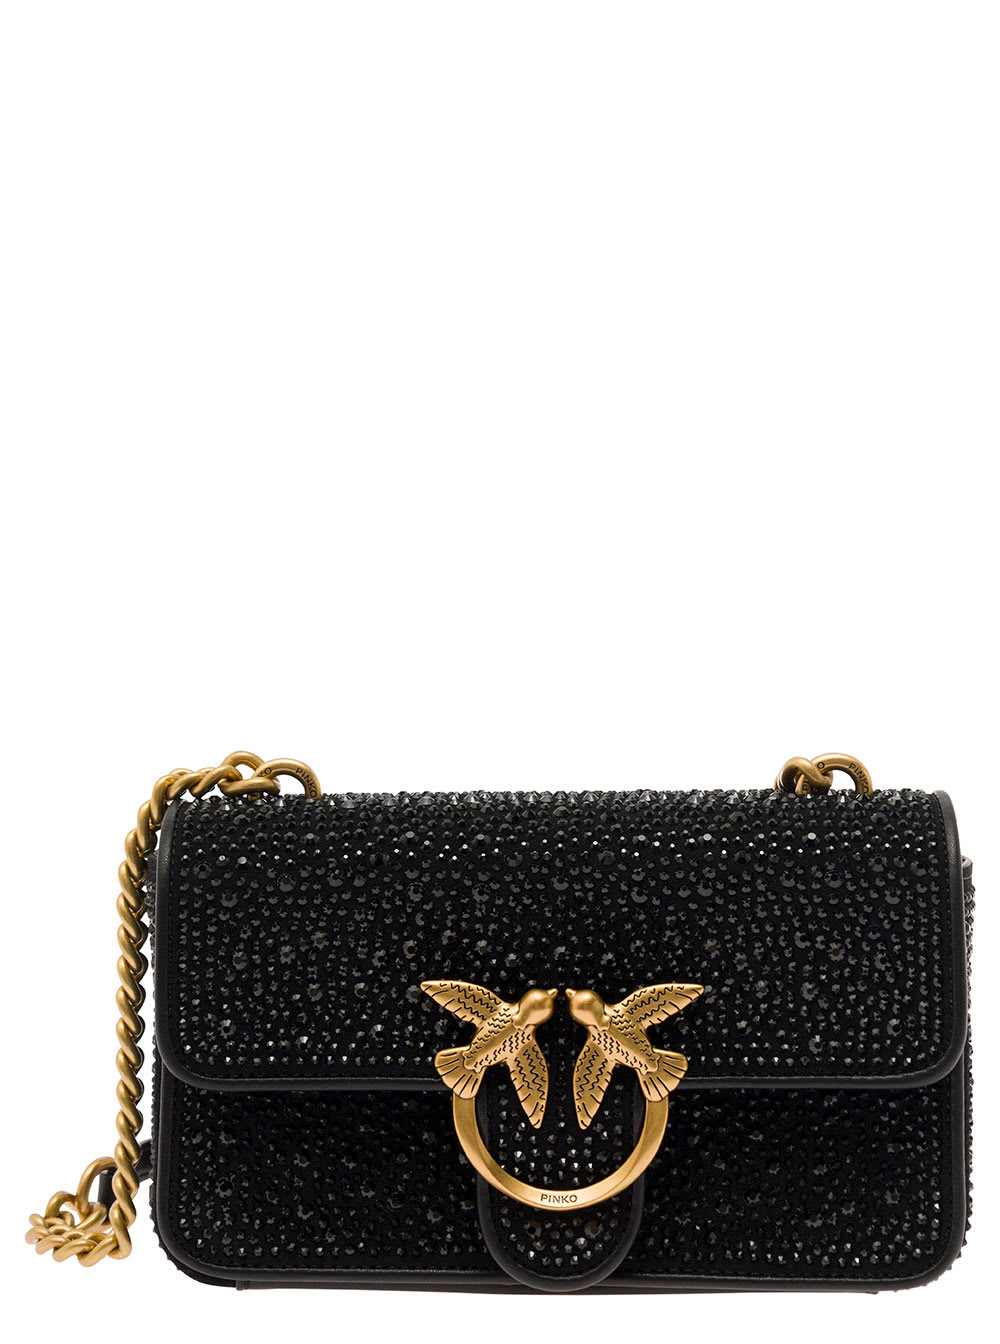 PINKO MINI LOVE ONE BLACK SHOULDER BAG WITH ALL-OVER RHINESTONES IN SUEDE WOMAN